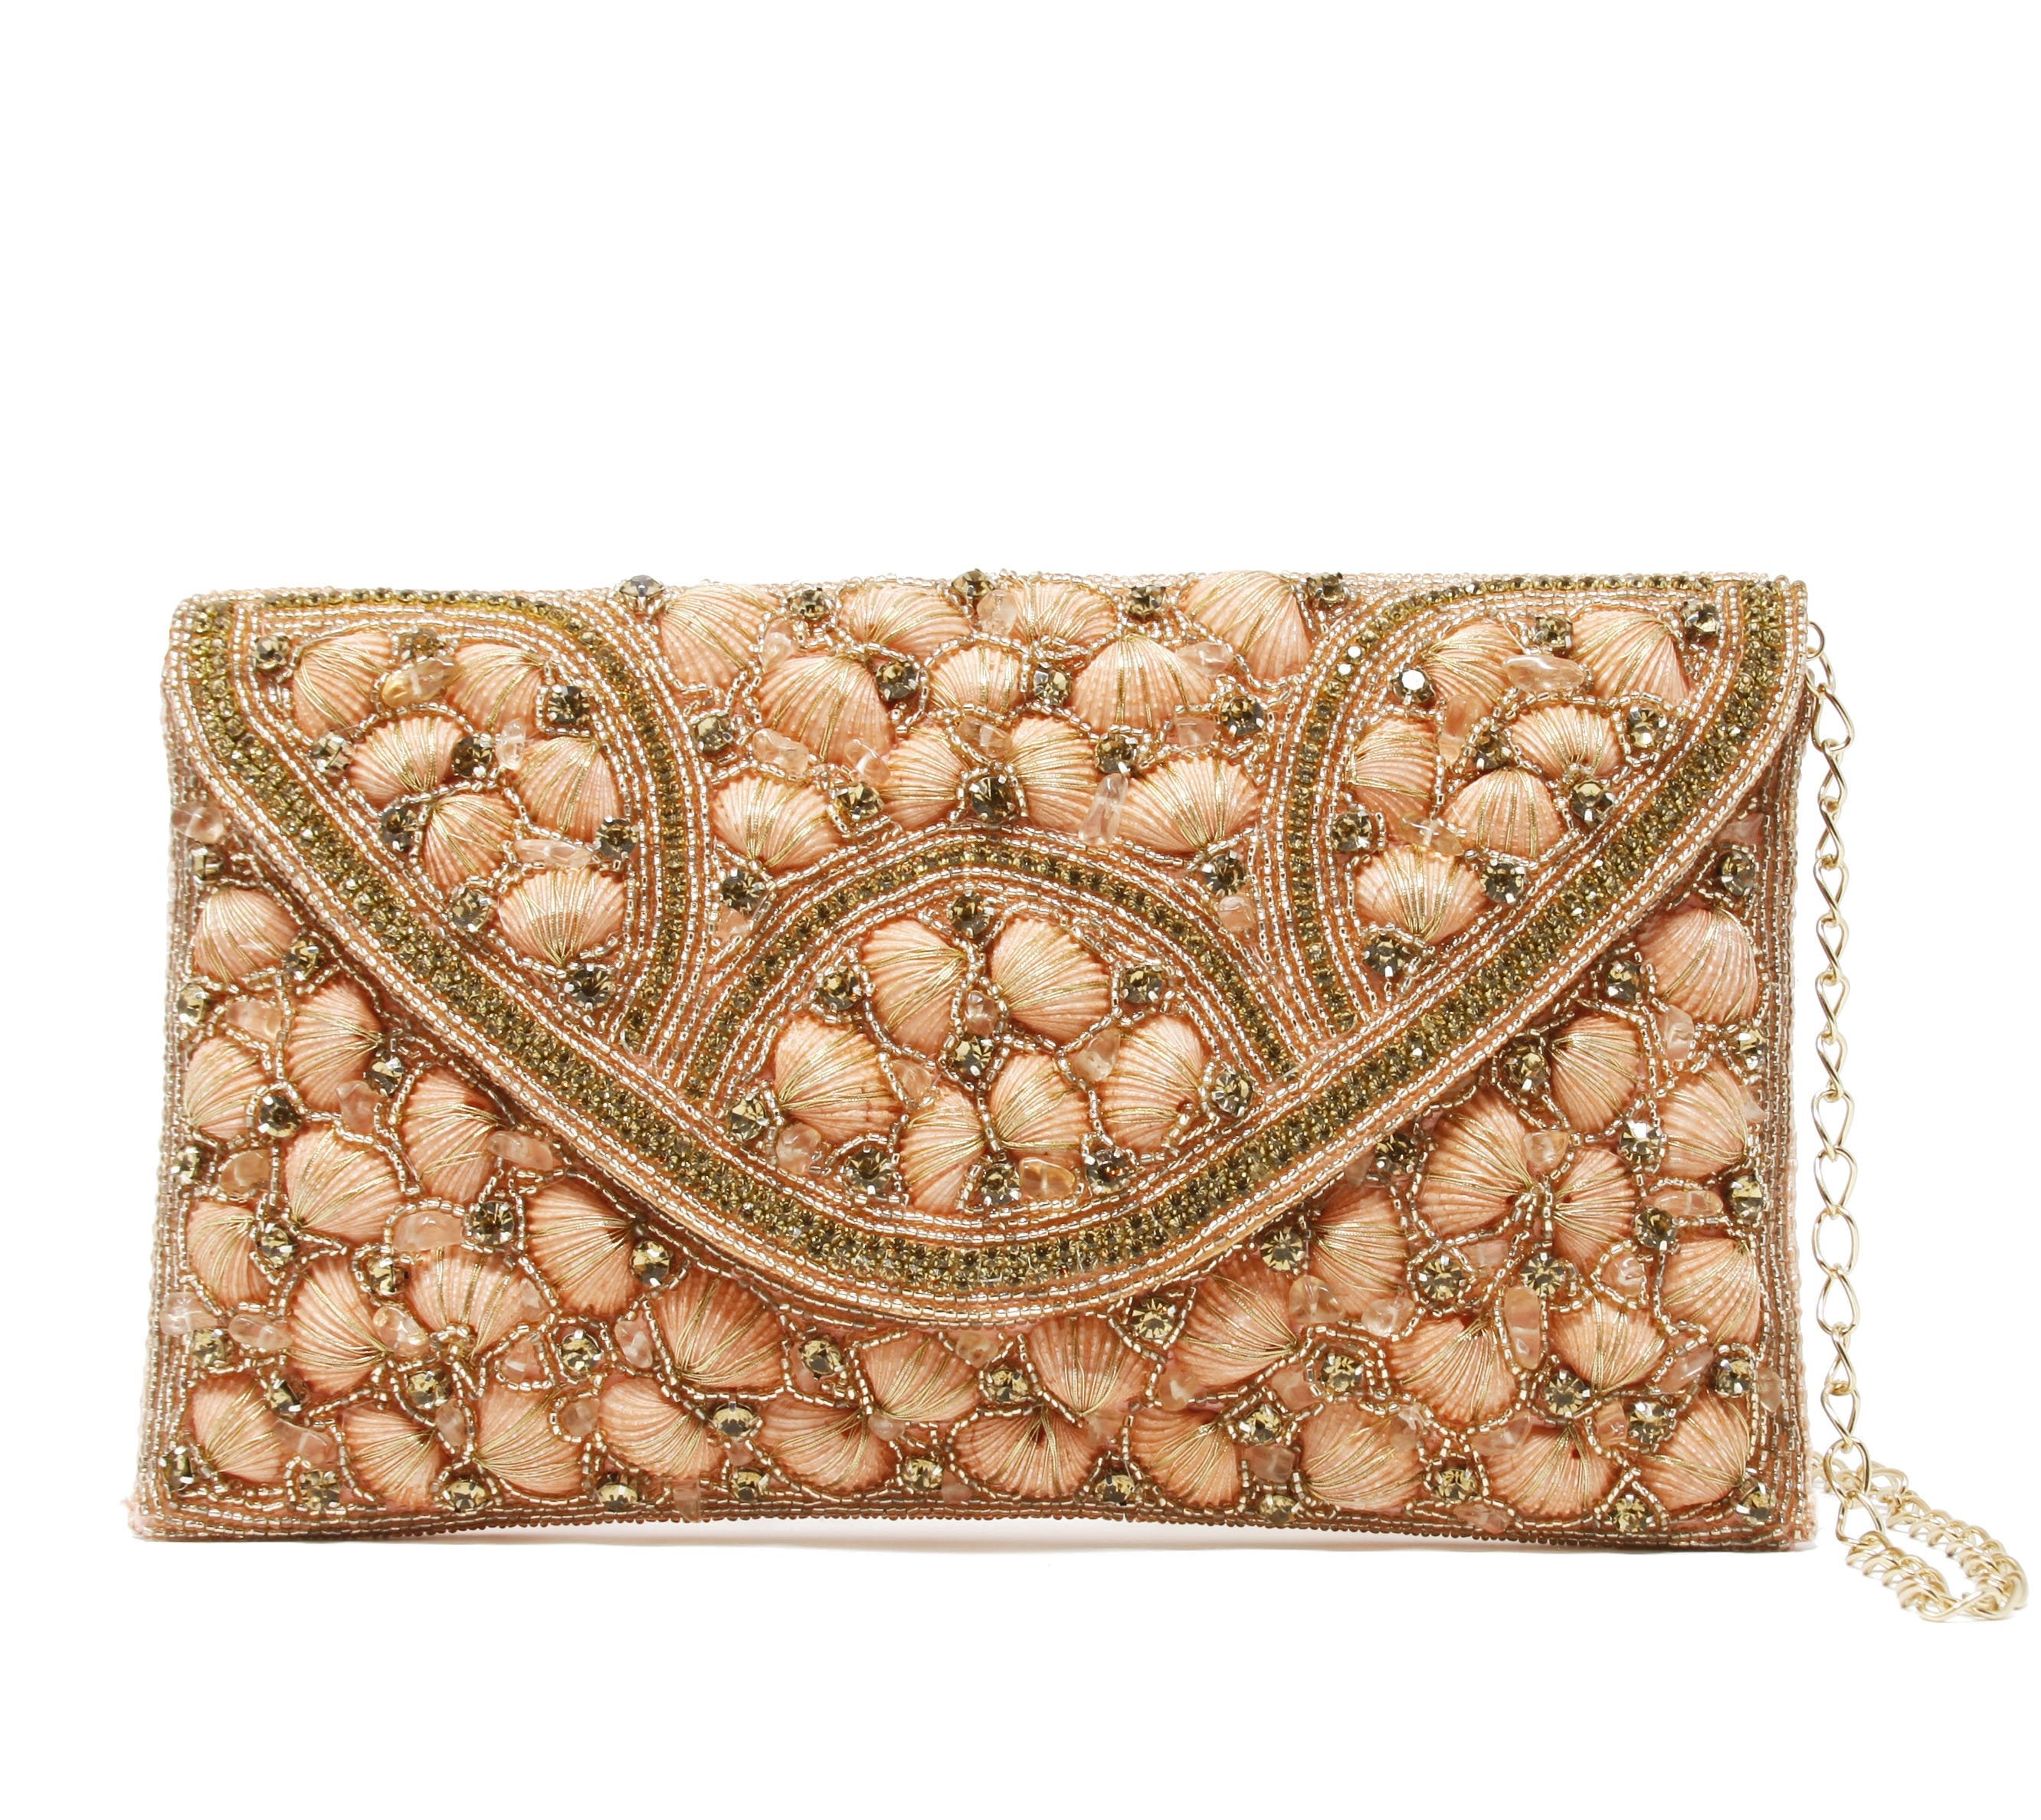 Sparkly gold and peach clutch with Gold chain strap & with inside pocket